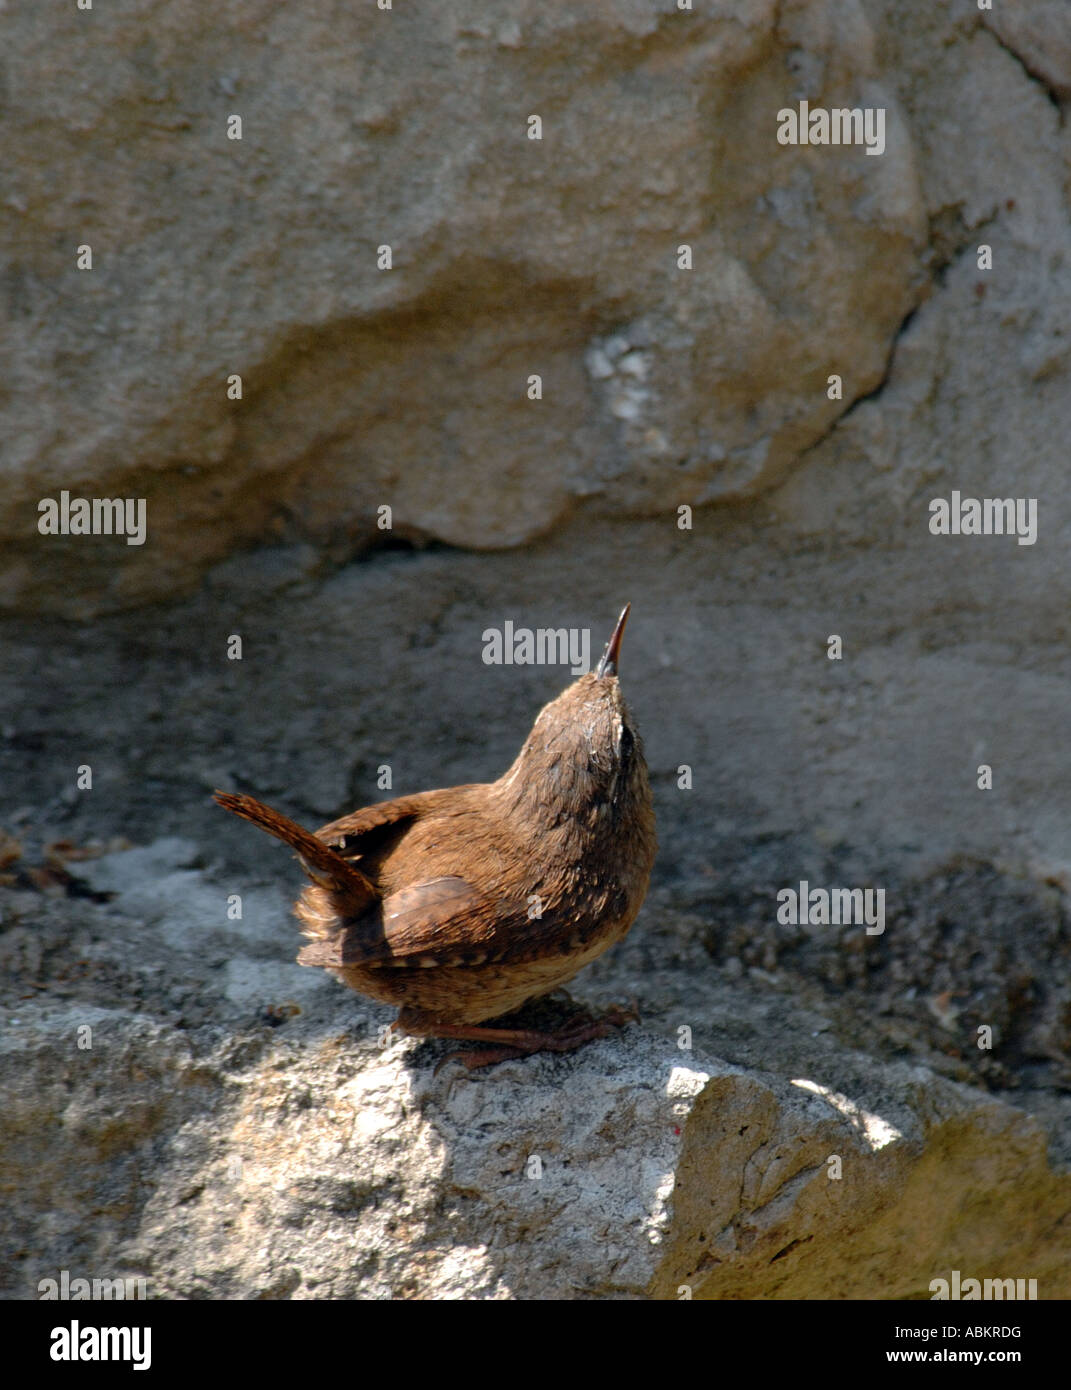 A Wren, typical English garden bird, perched on ledge on a stone garden wall and looking upwards Stock Photo